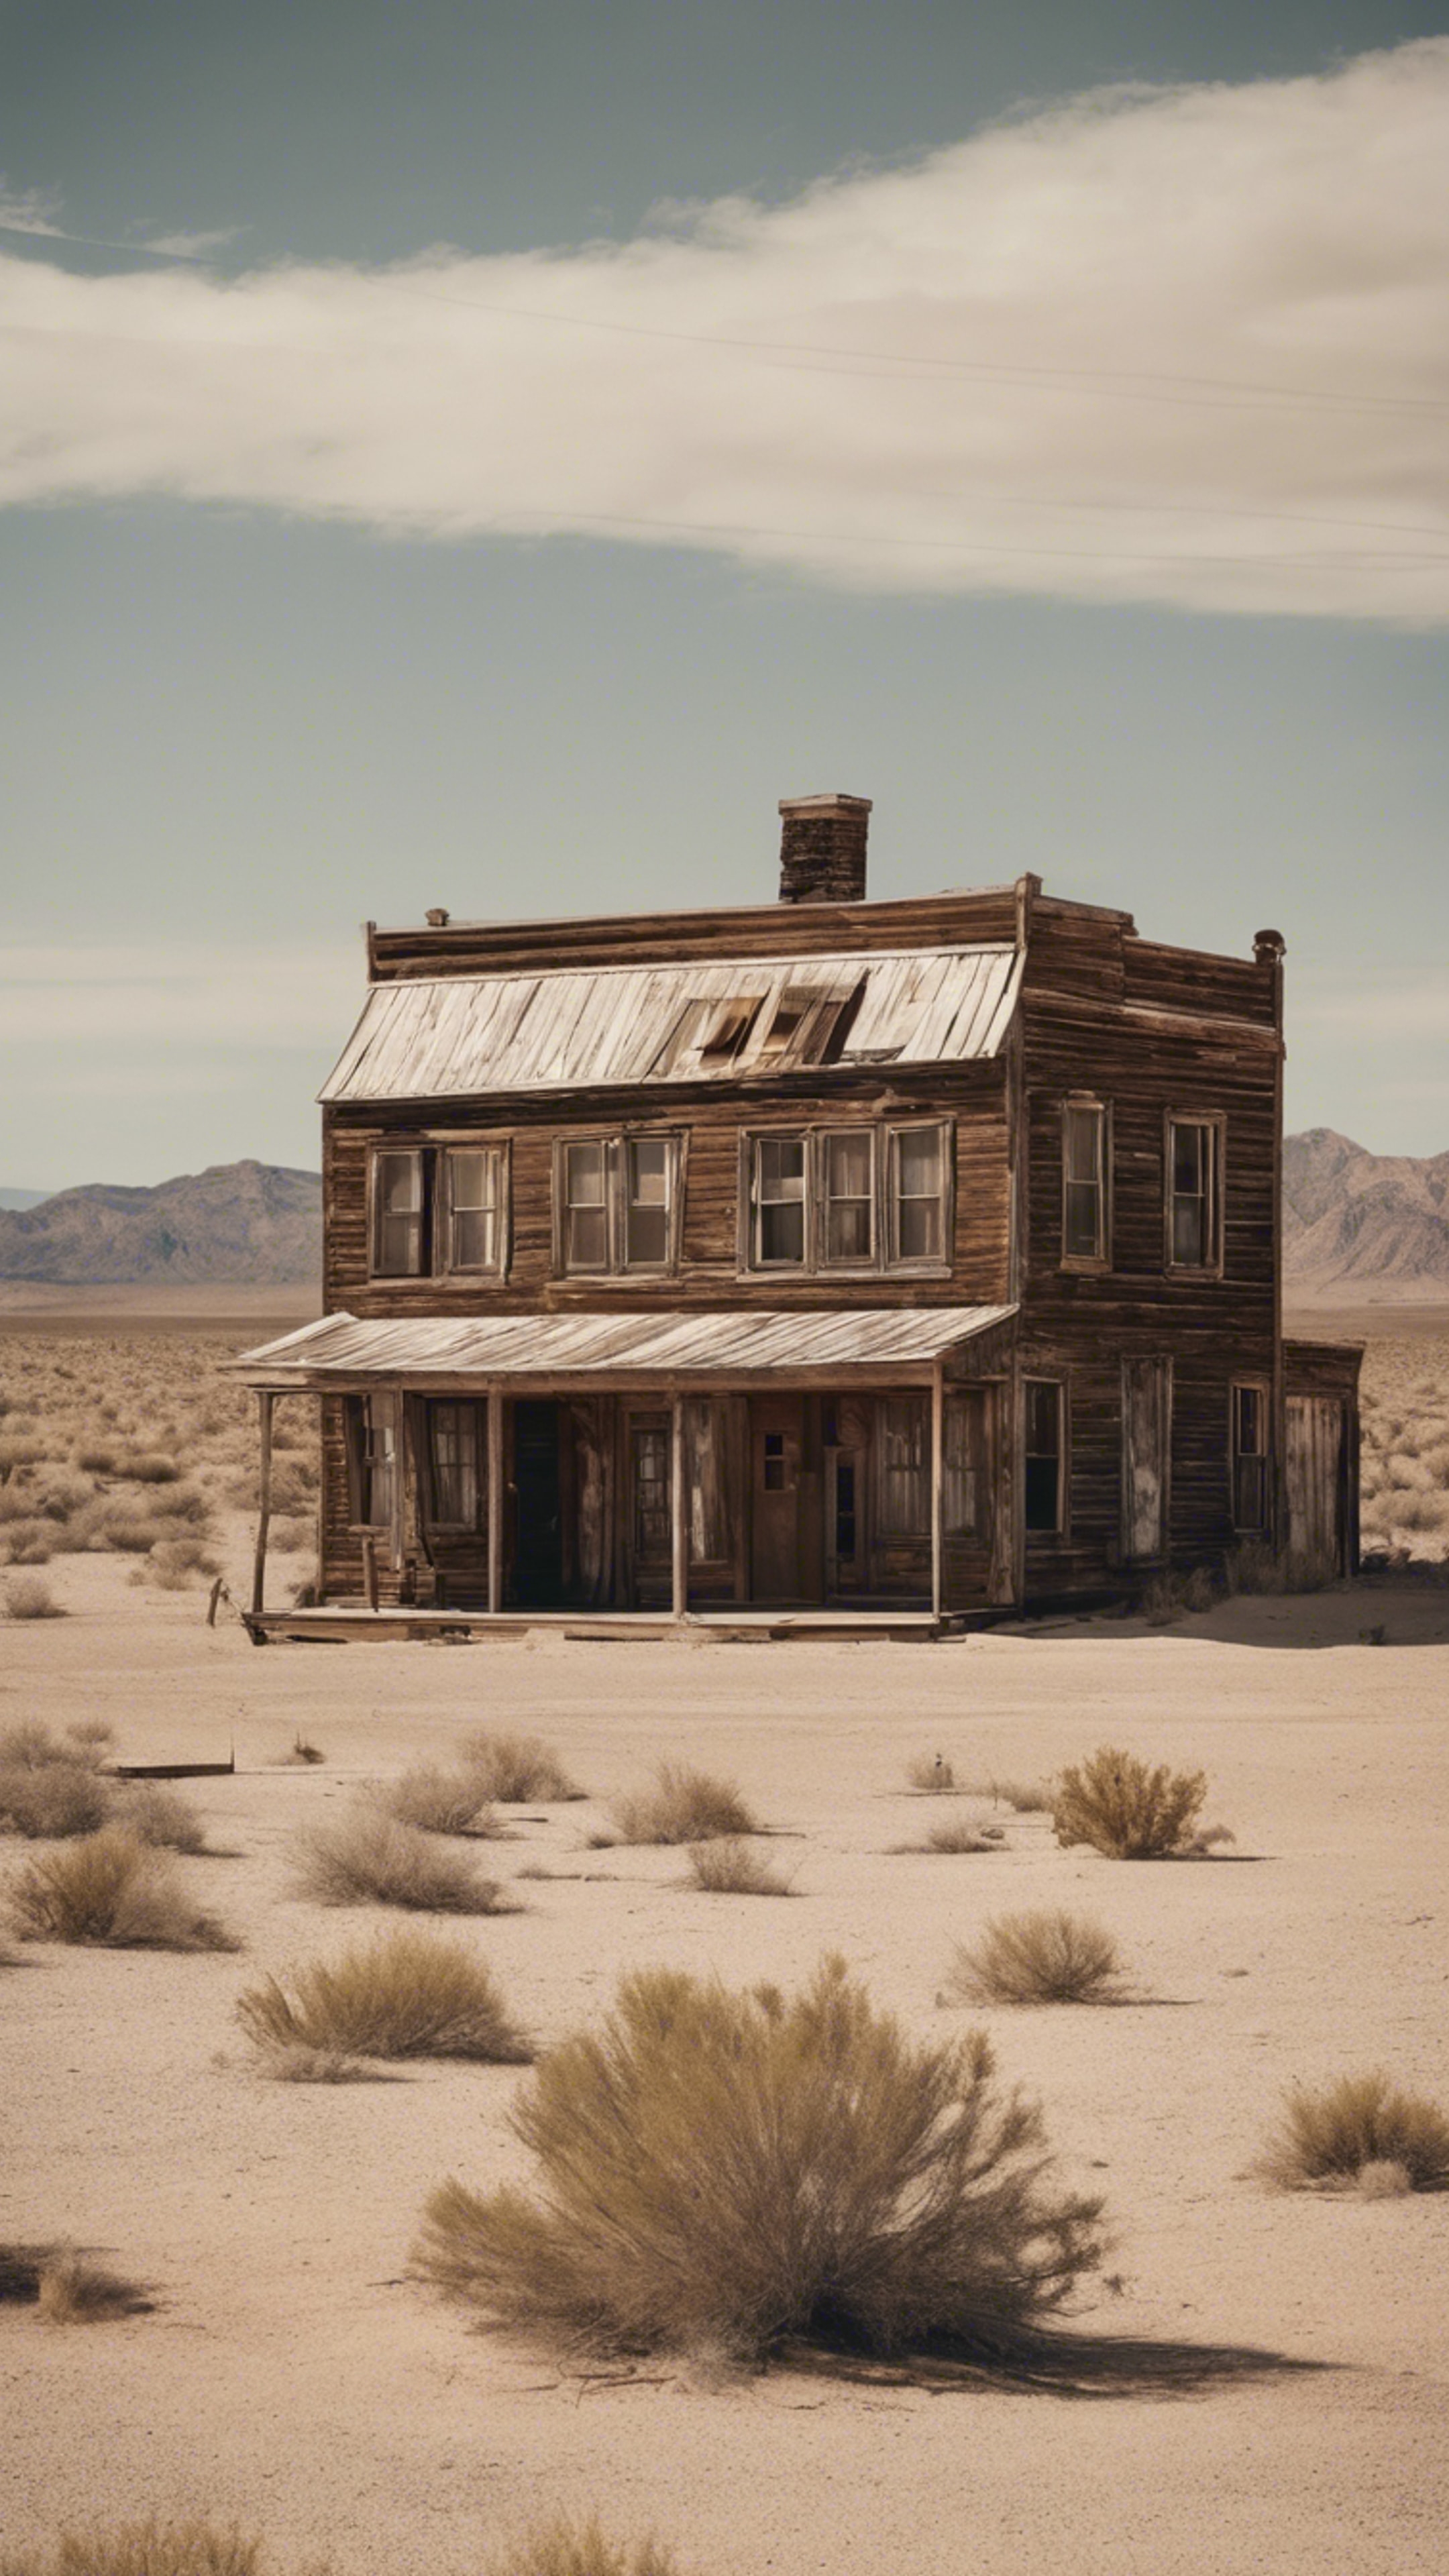 An old western ghost town located in the heart of an inhospitable sandy desert. Tapet[5d1c1c6d4731481194e6]